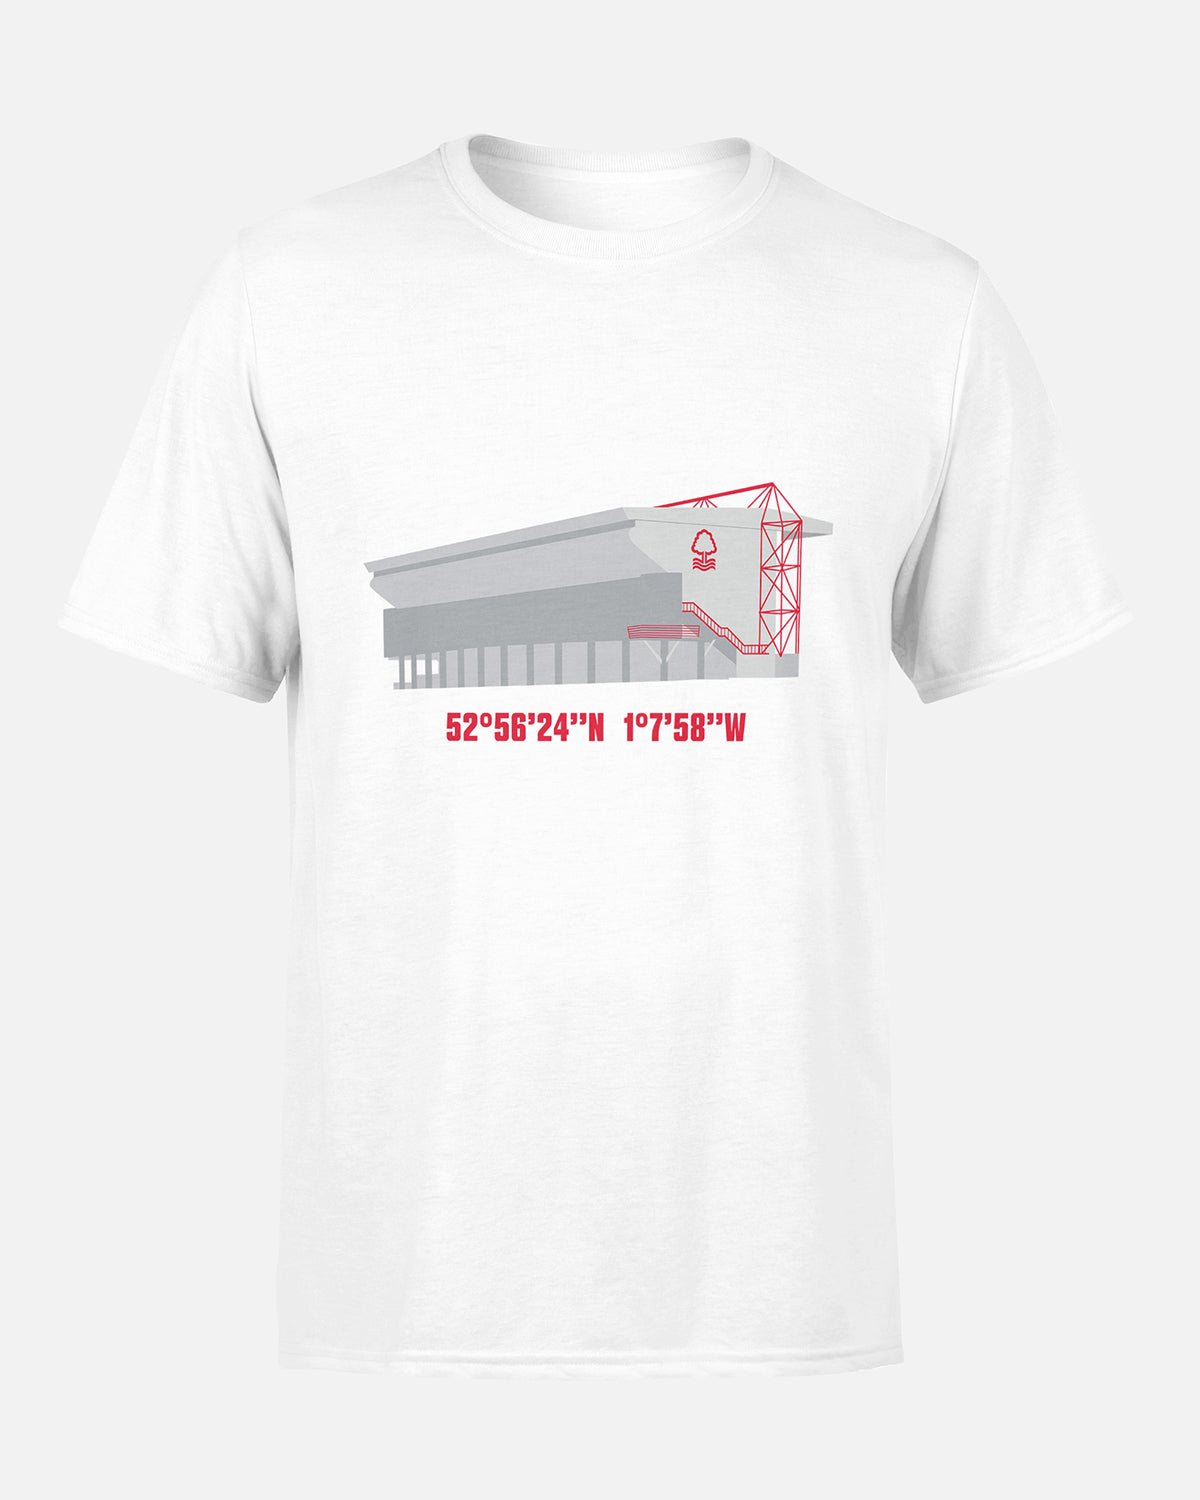 NFFC Adult White Trent End T-Shirt - Nottingham Forest FC